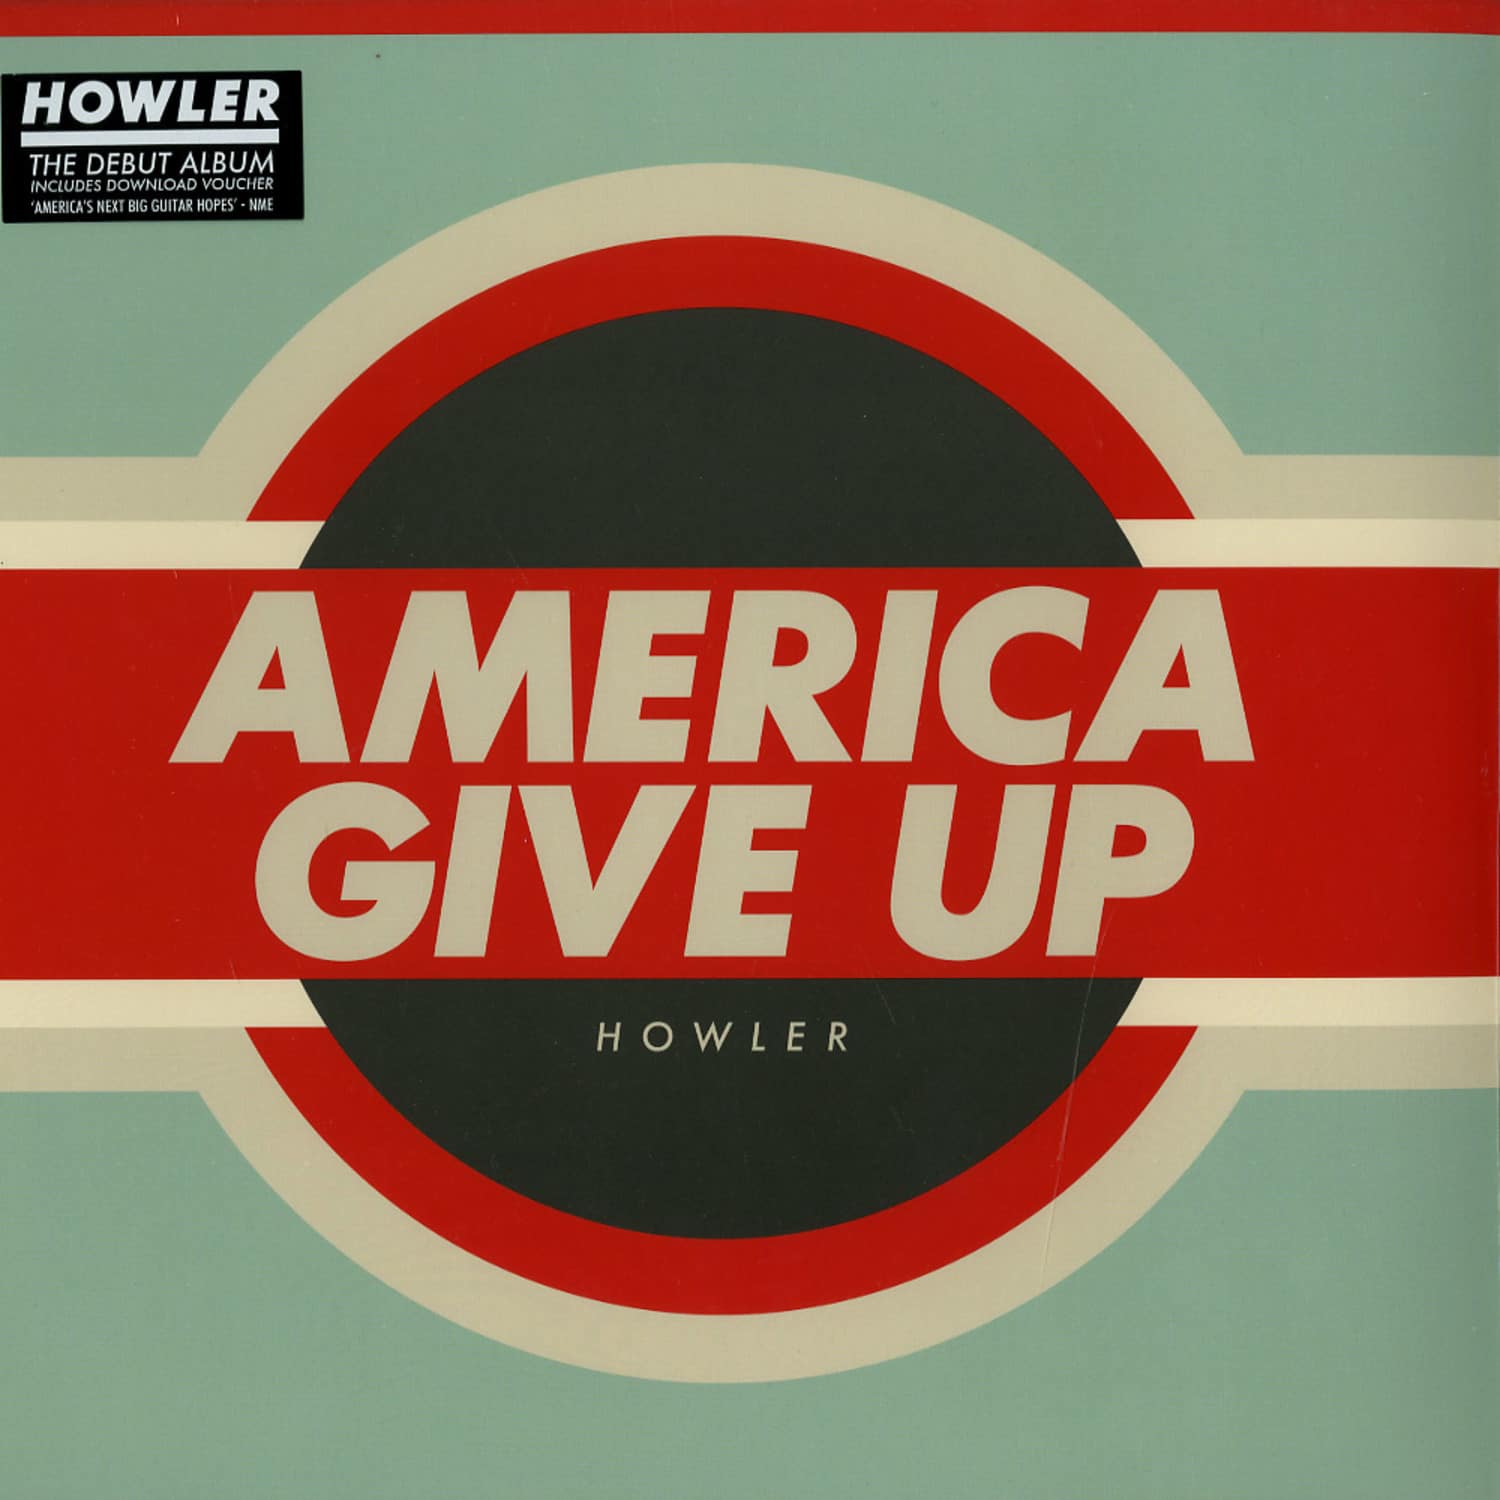 Howler - AMERICA GIVE UP 